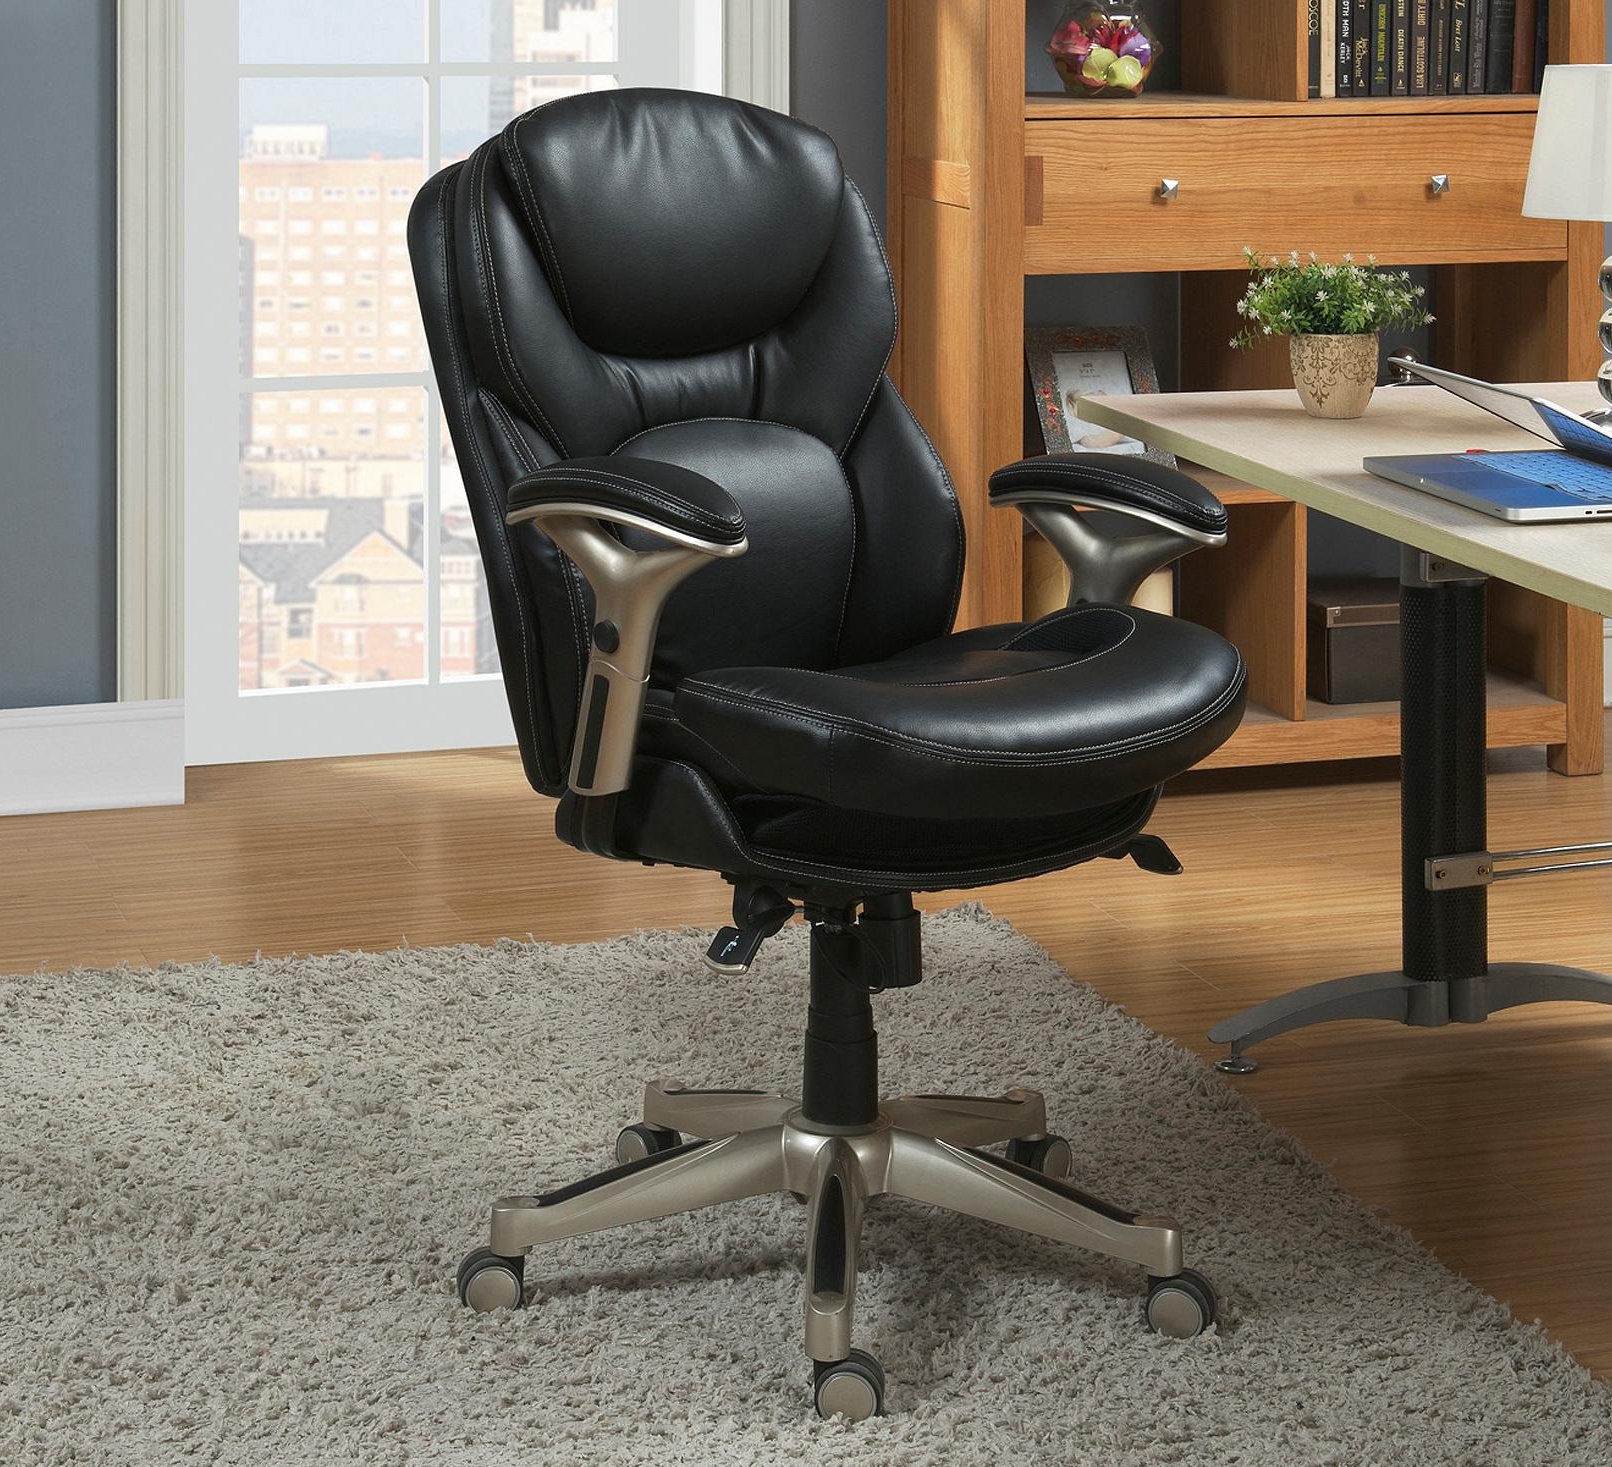 Serta 44186 Back in Motion - office chair